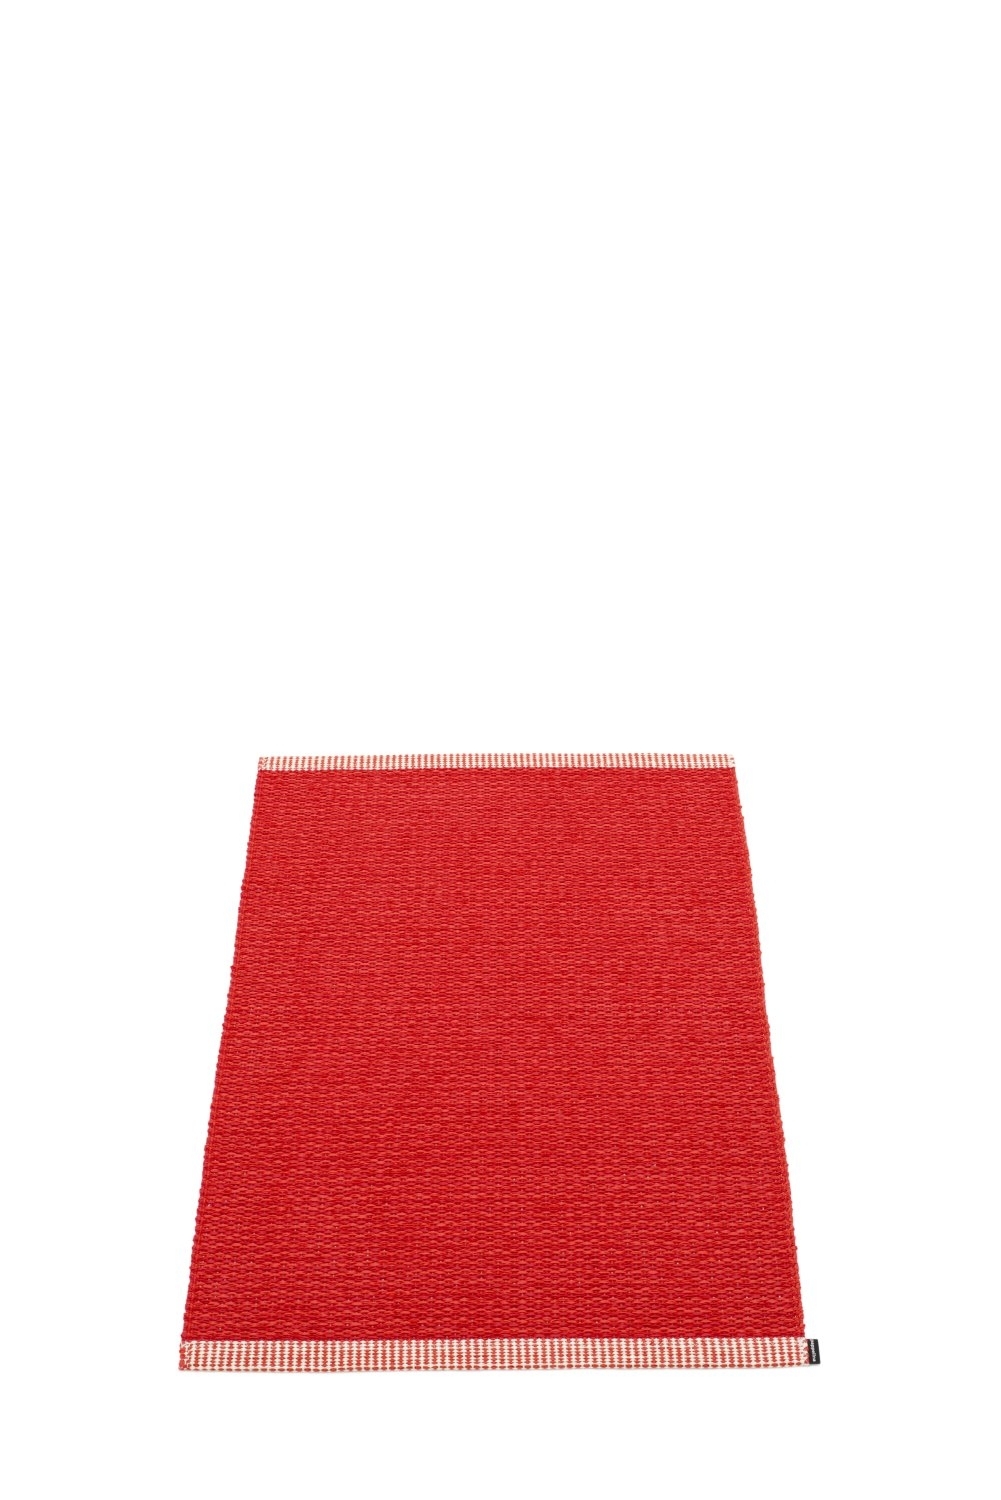 Mono Teppich- Red/ Coral Red- 85 X 160 Cm Rot